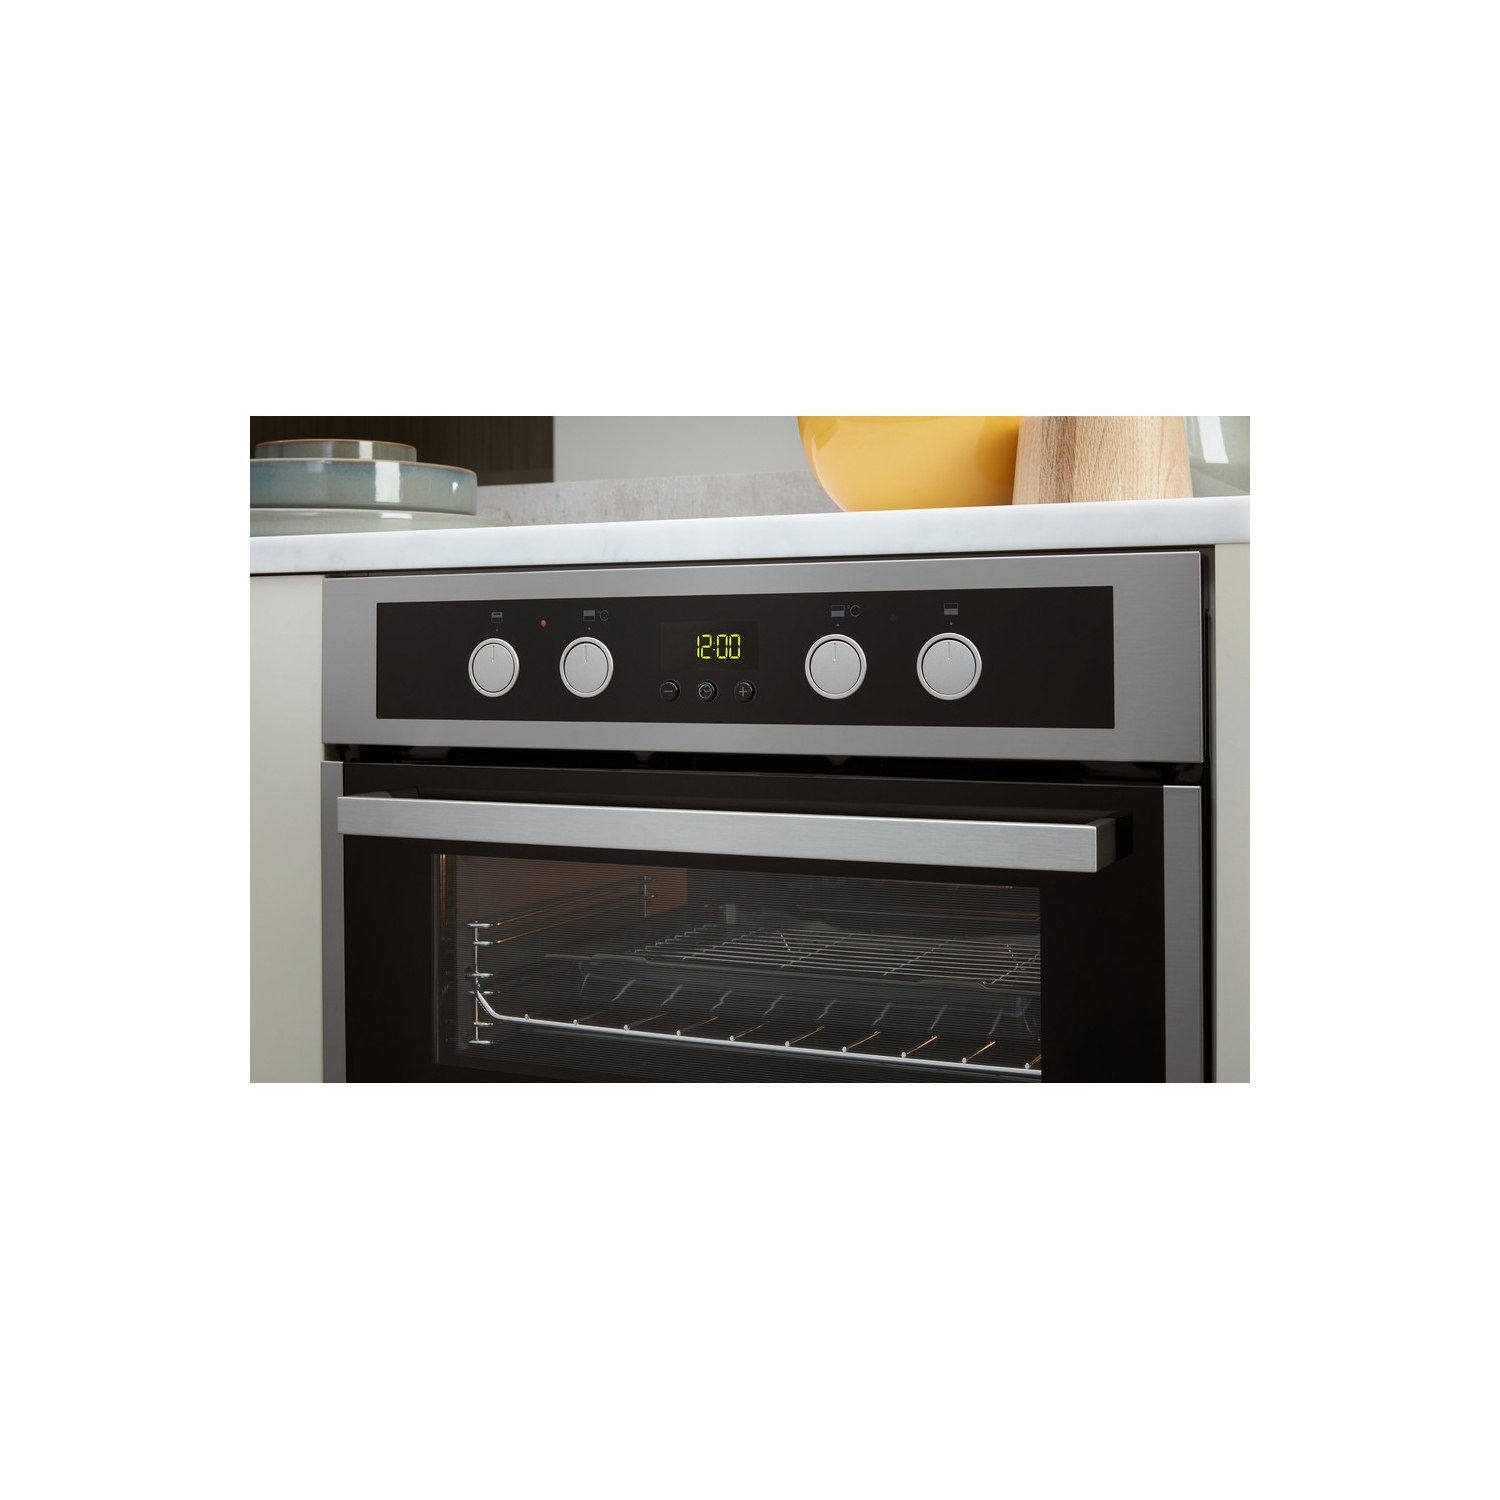 Whirlpool 60cm Built-In Electric Oven - Stainless Steel - A Rated - 3